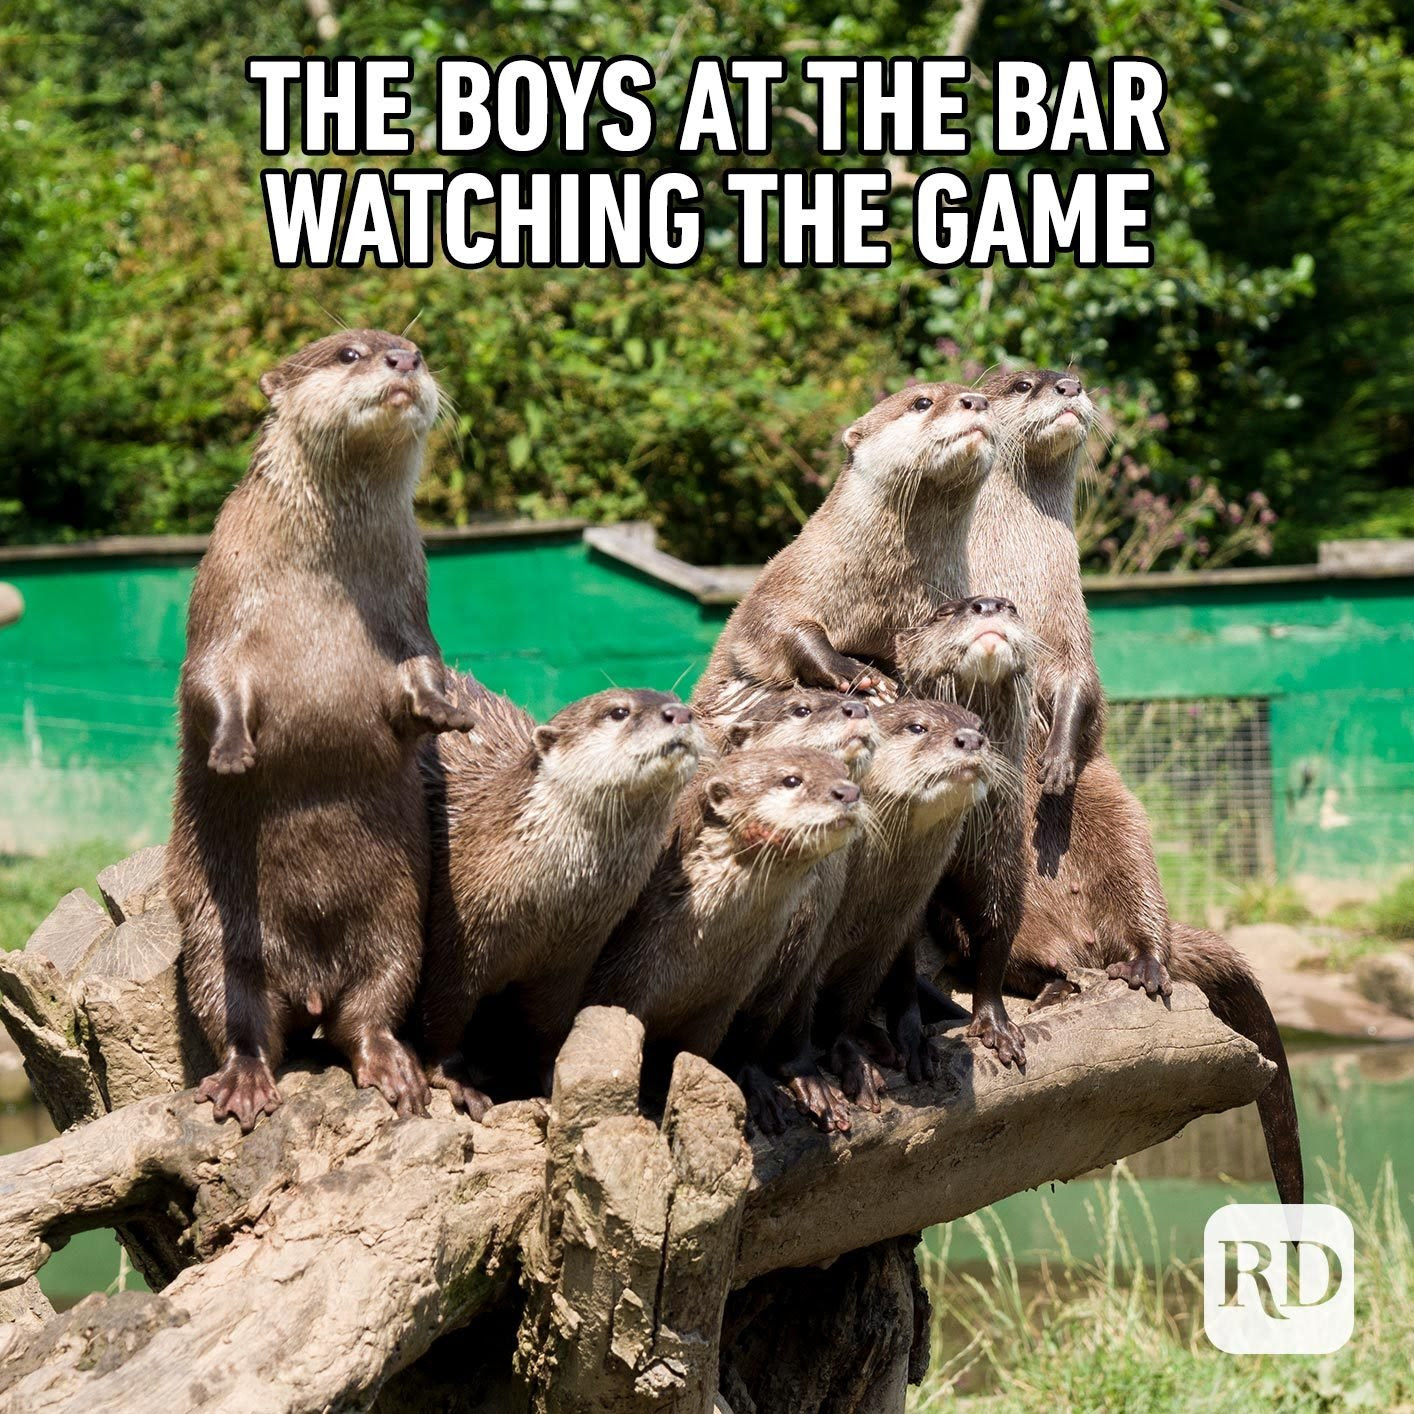 Beavers on a log. Meme text: The boys at the bar watching the game